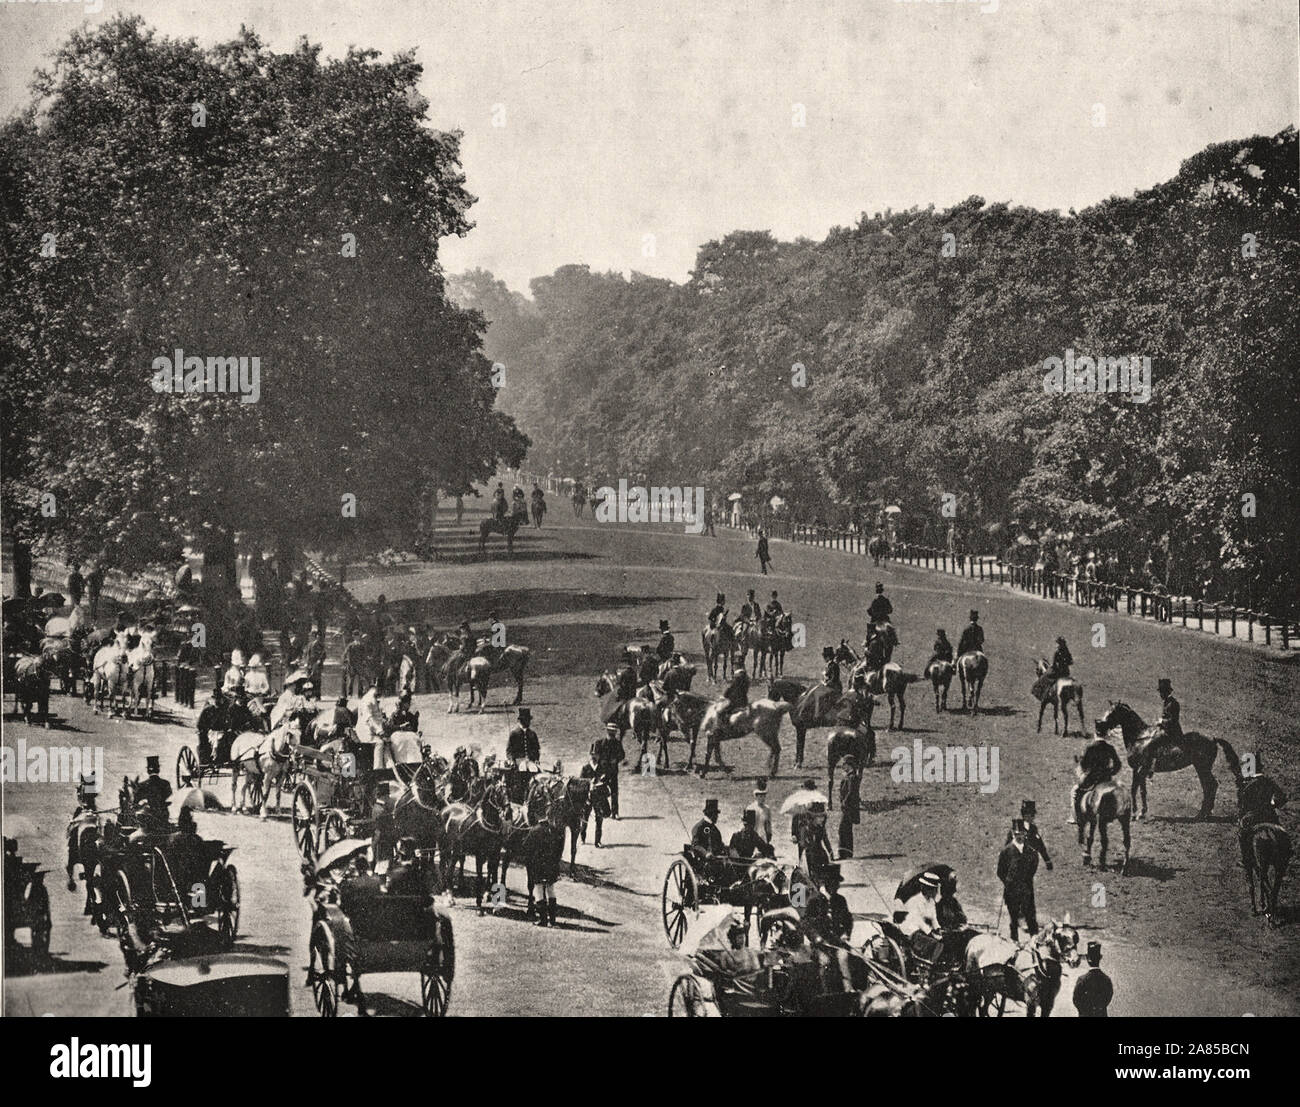 From 'The Descriptive Album of London' by George H Birch 1896 - Extract text : ' ROTTEN ROW.—It is by this name 'that is known the tract, stretching from Hyde Park Corner to Queen's Gate, which is kept apart for the sole use of equestrians. with Rotten Row is The Drive,' which extends along the same distance. On a fine day this is one of the most characteristic sights of London. In the season are thronged from 11 to 1, and again fronl 5 to 7, with fashionably dressed people riding, driving, walking or seated on chairs provided at the Of On Sunday mornings, after Church, crowds of Ladies and Ge Stock Photo